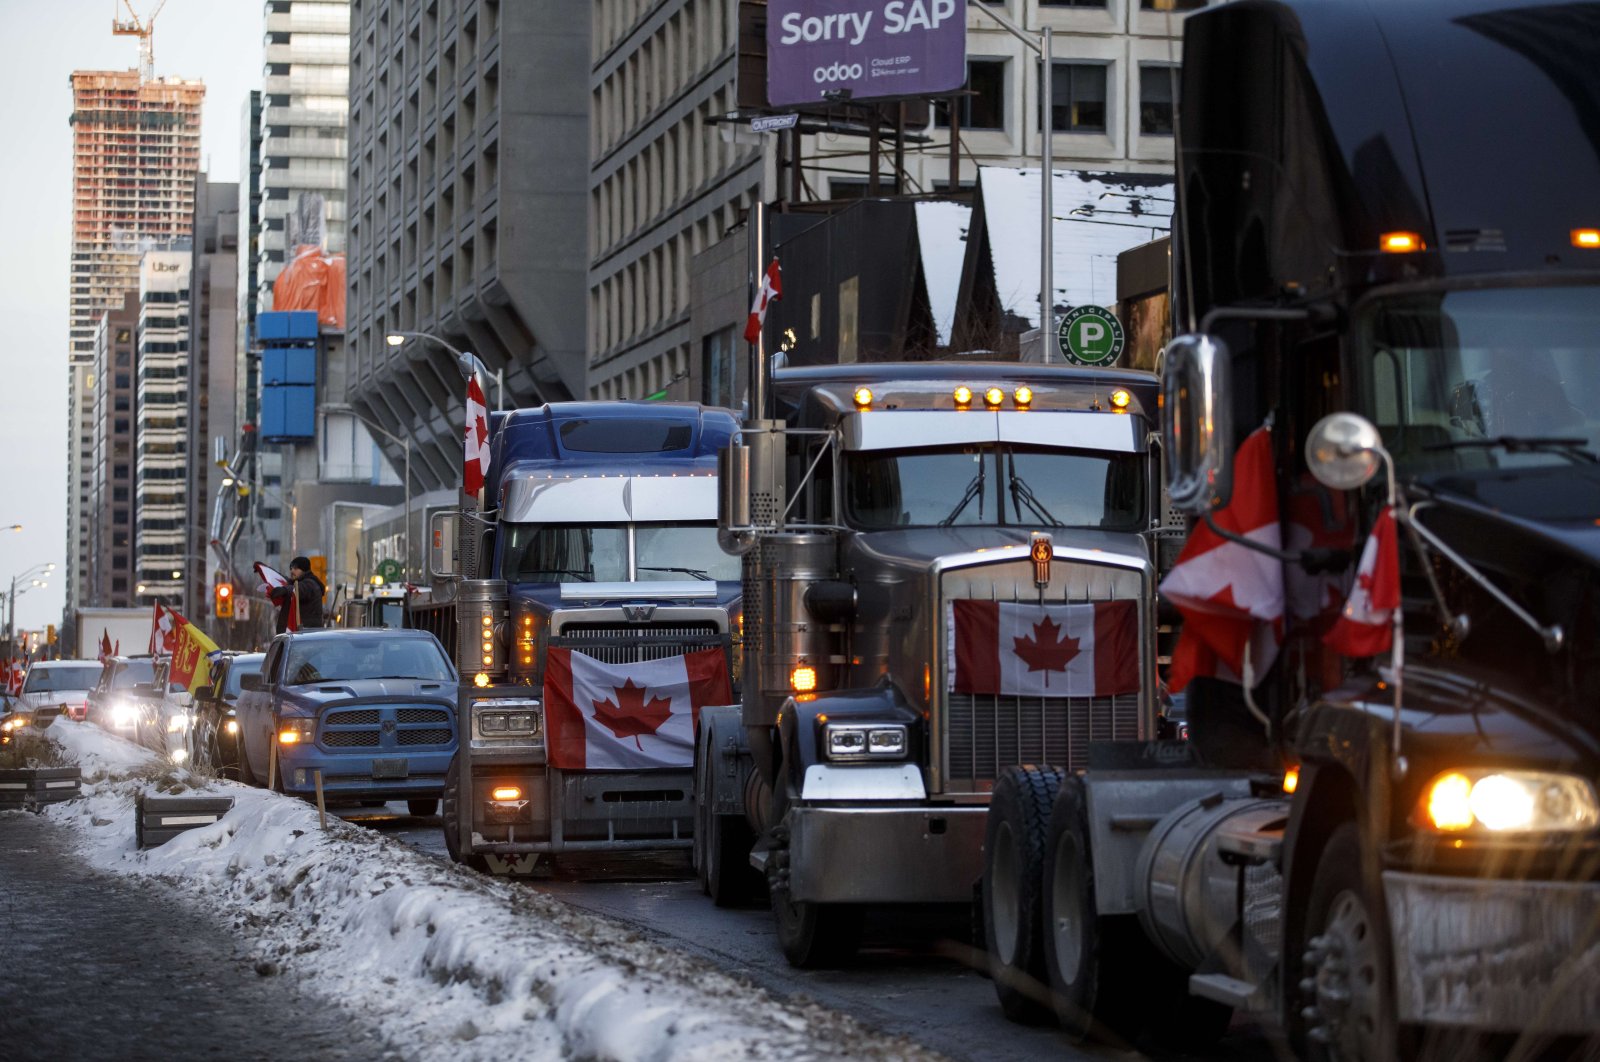 Trucks line a street in Bloor near Yorkville, Toronto, Canada, Feb. 5, 2022. (Getty Images via AFP)